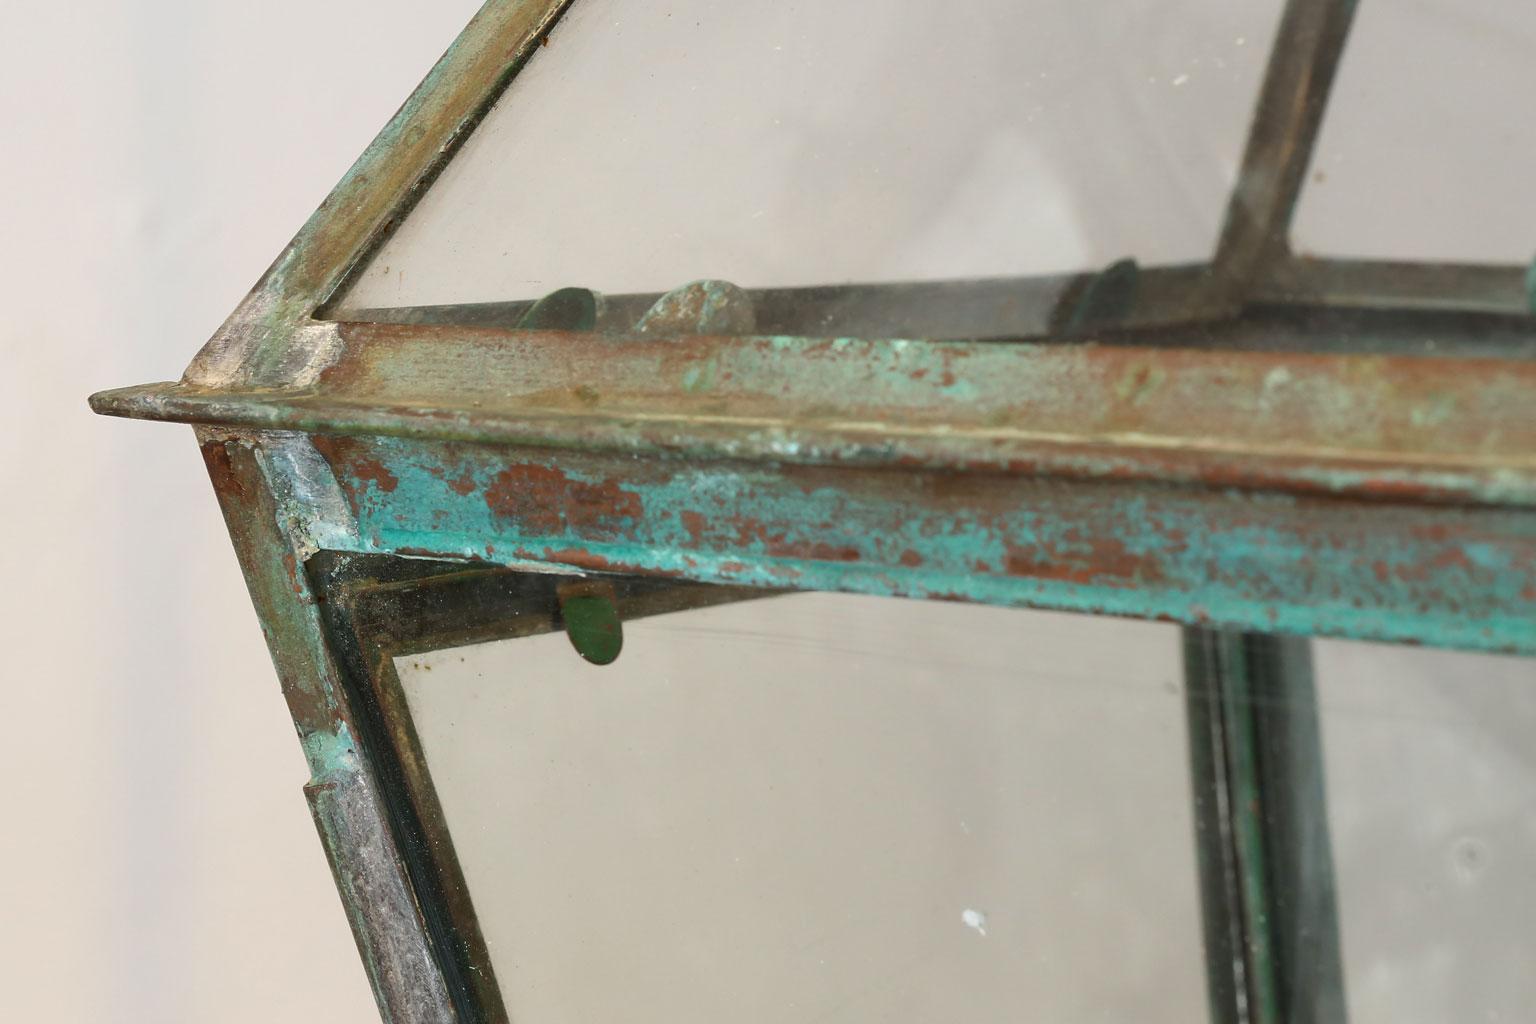 Green-verdigris copper and brass lantern with glass panels dating to the late 19th century. This French lantern can be wired for electricity or fitted for usage with gas for an additional cost.